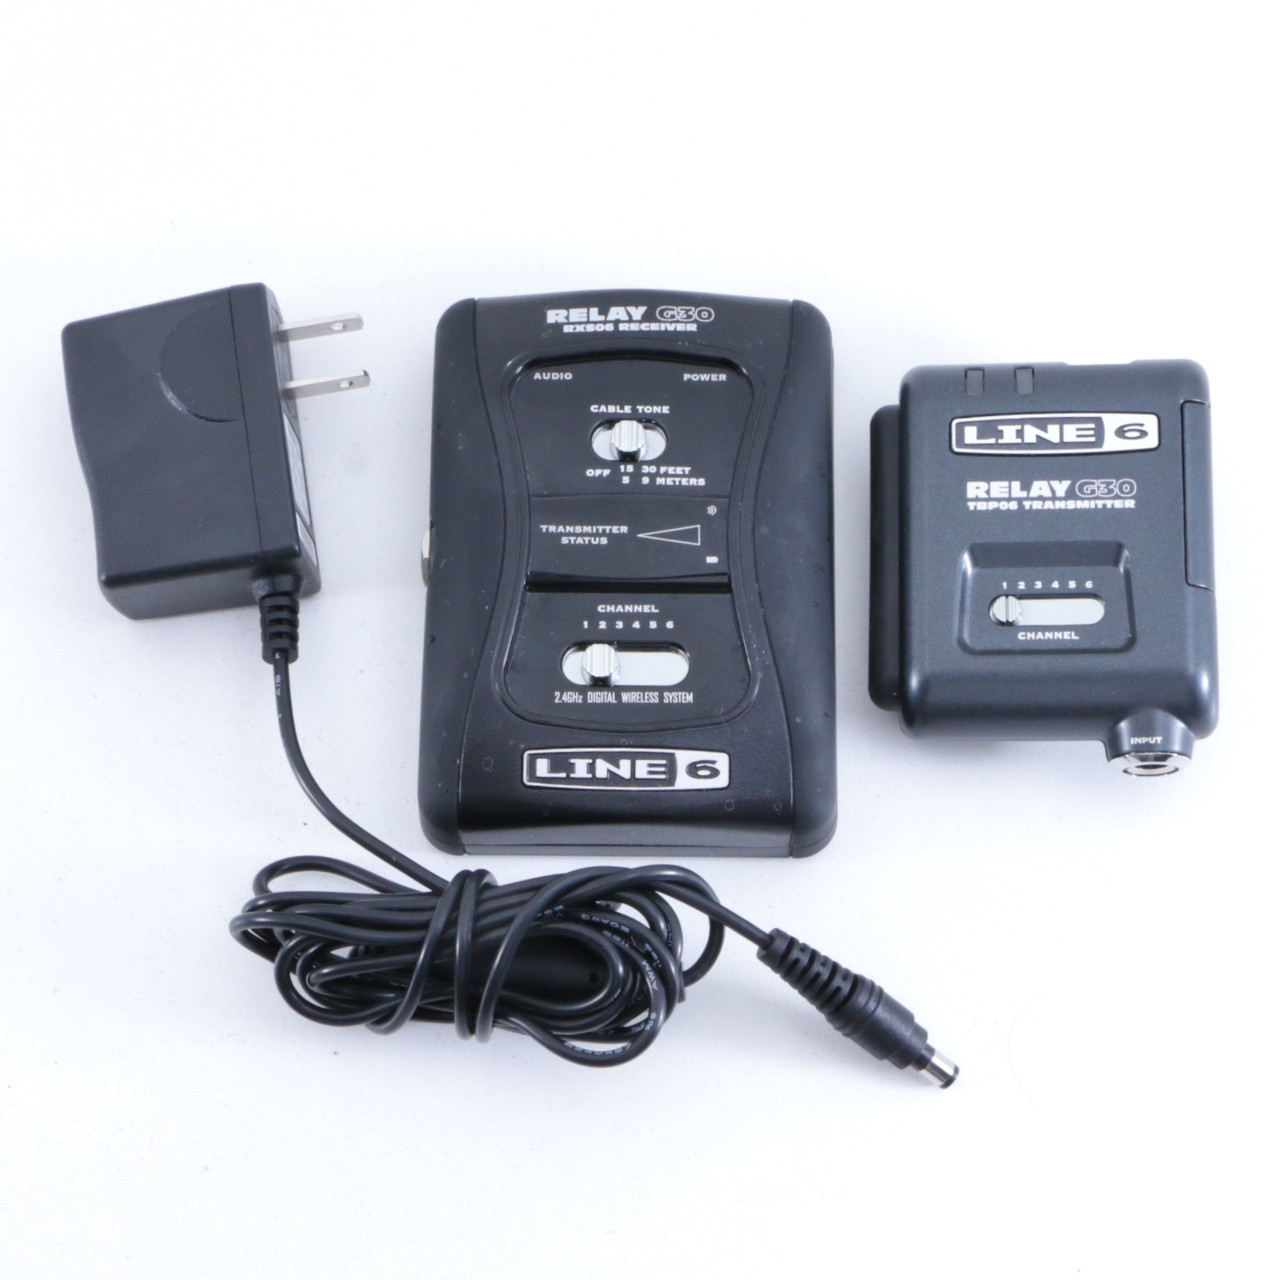 Line 6 Relay G30 Wireless Guitar System & Power Supply P-06066